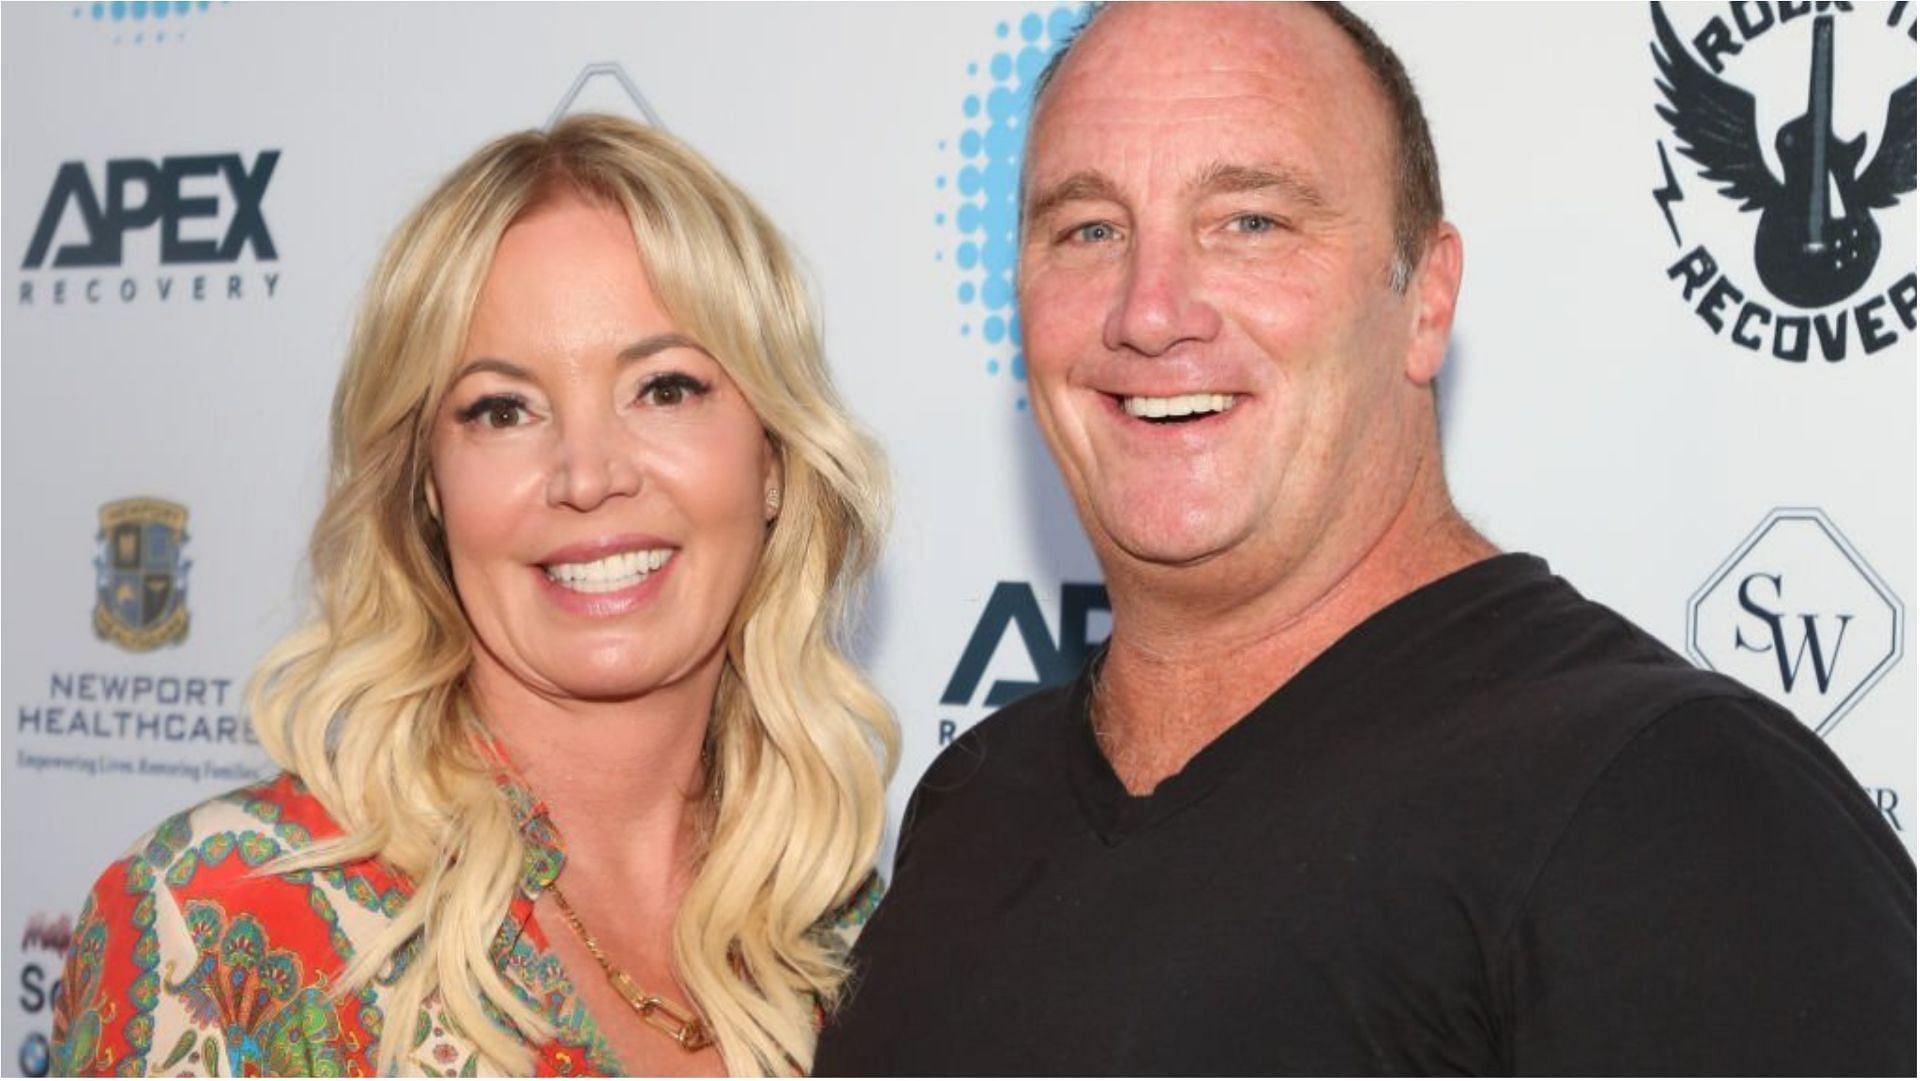 Jeanie Buss and Jay Mohr are now engaged (Image via Paul Archuleta/Getty Images)